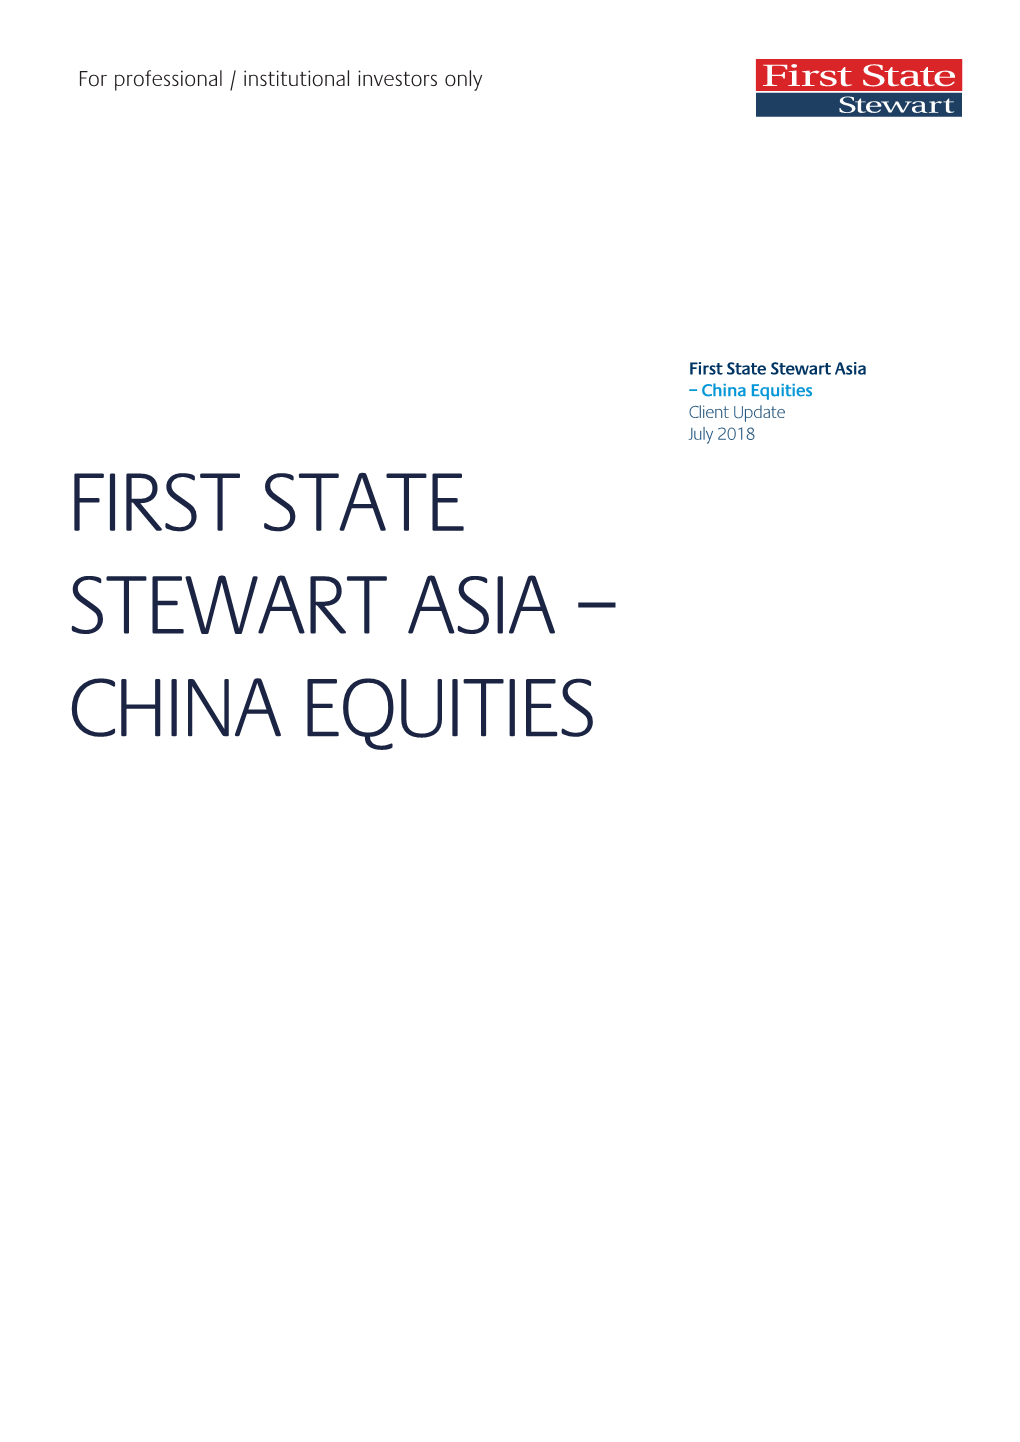 China Equities Client Update July 2018 FIRST STATE STEWART ASIA – CHINA EQUITIES Client Update | July 2018 First State Stewart Asia – China Equities